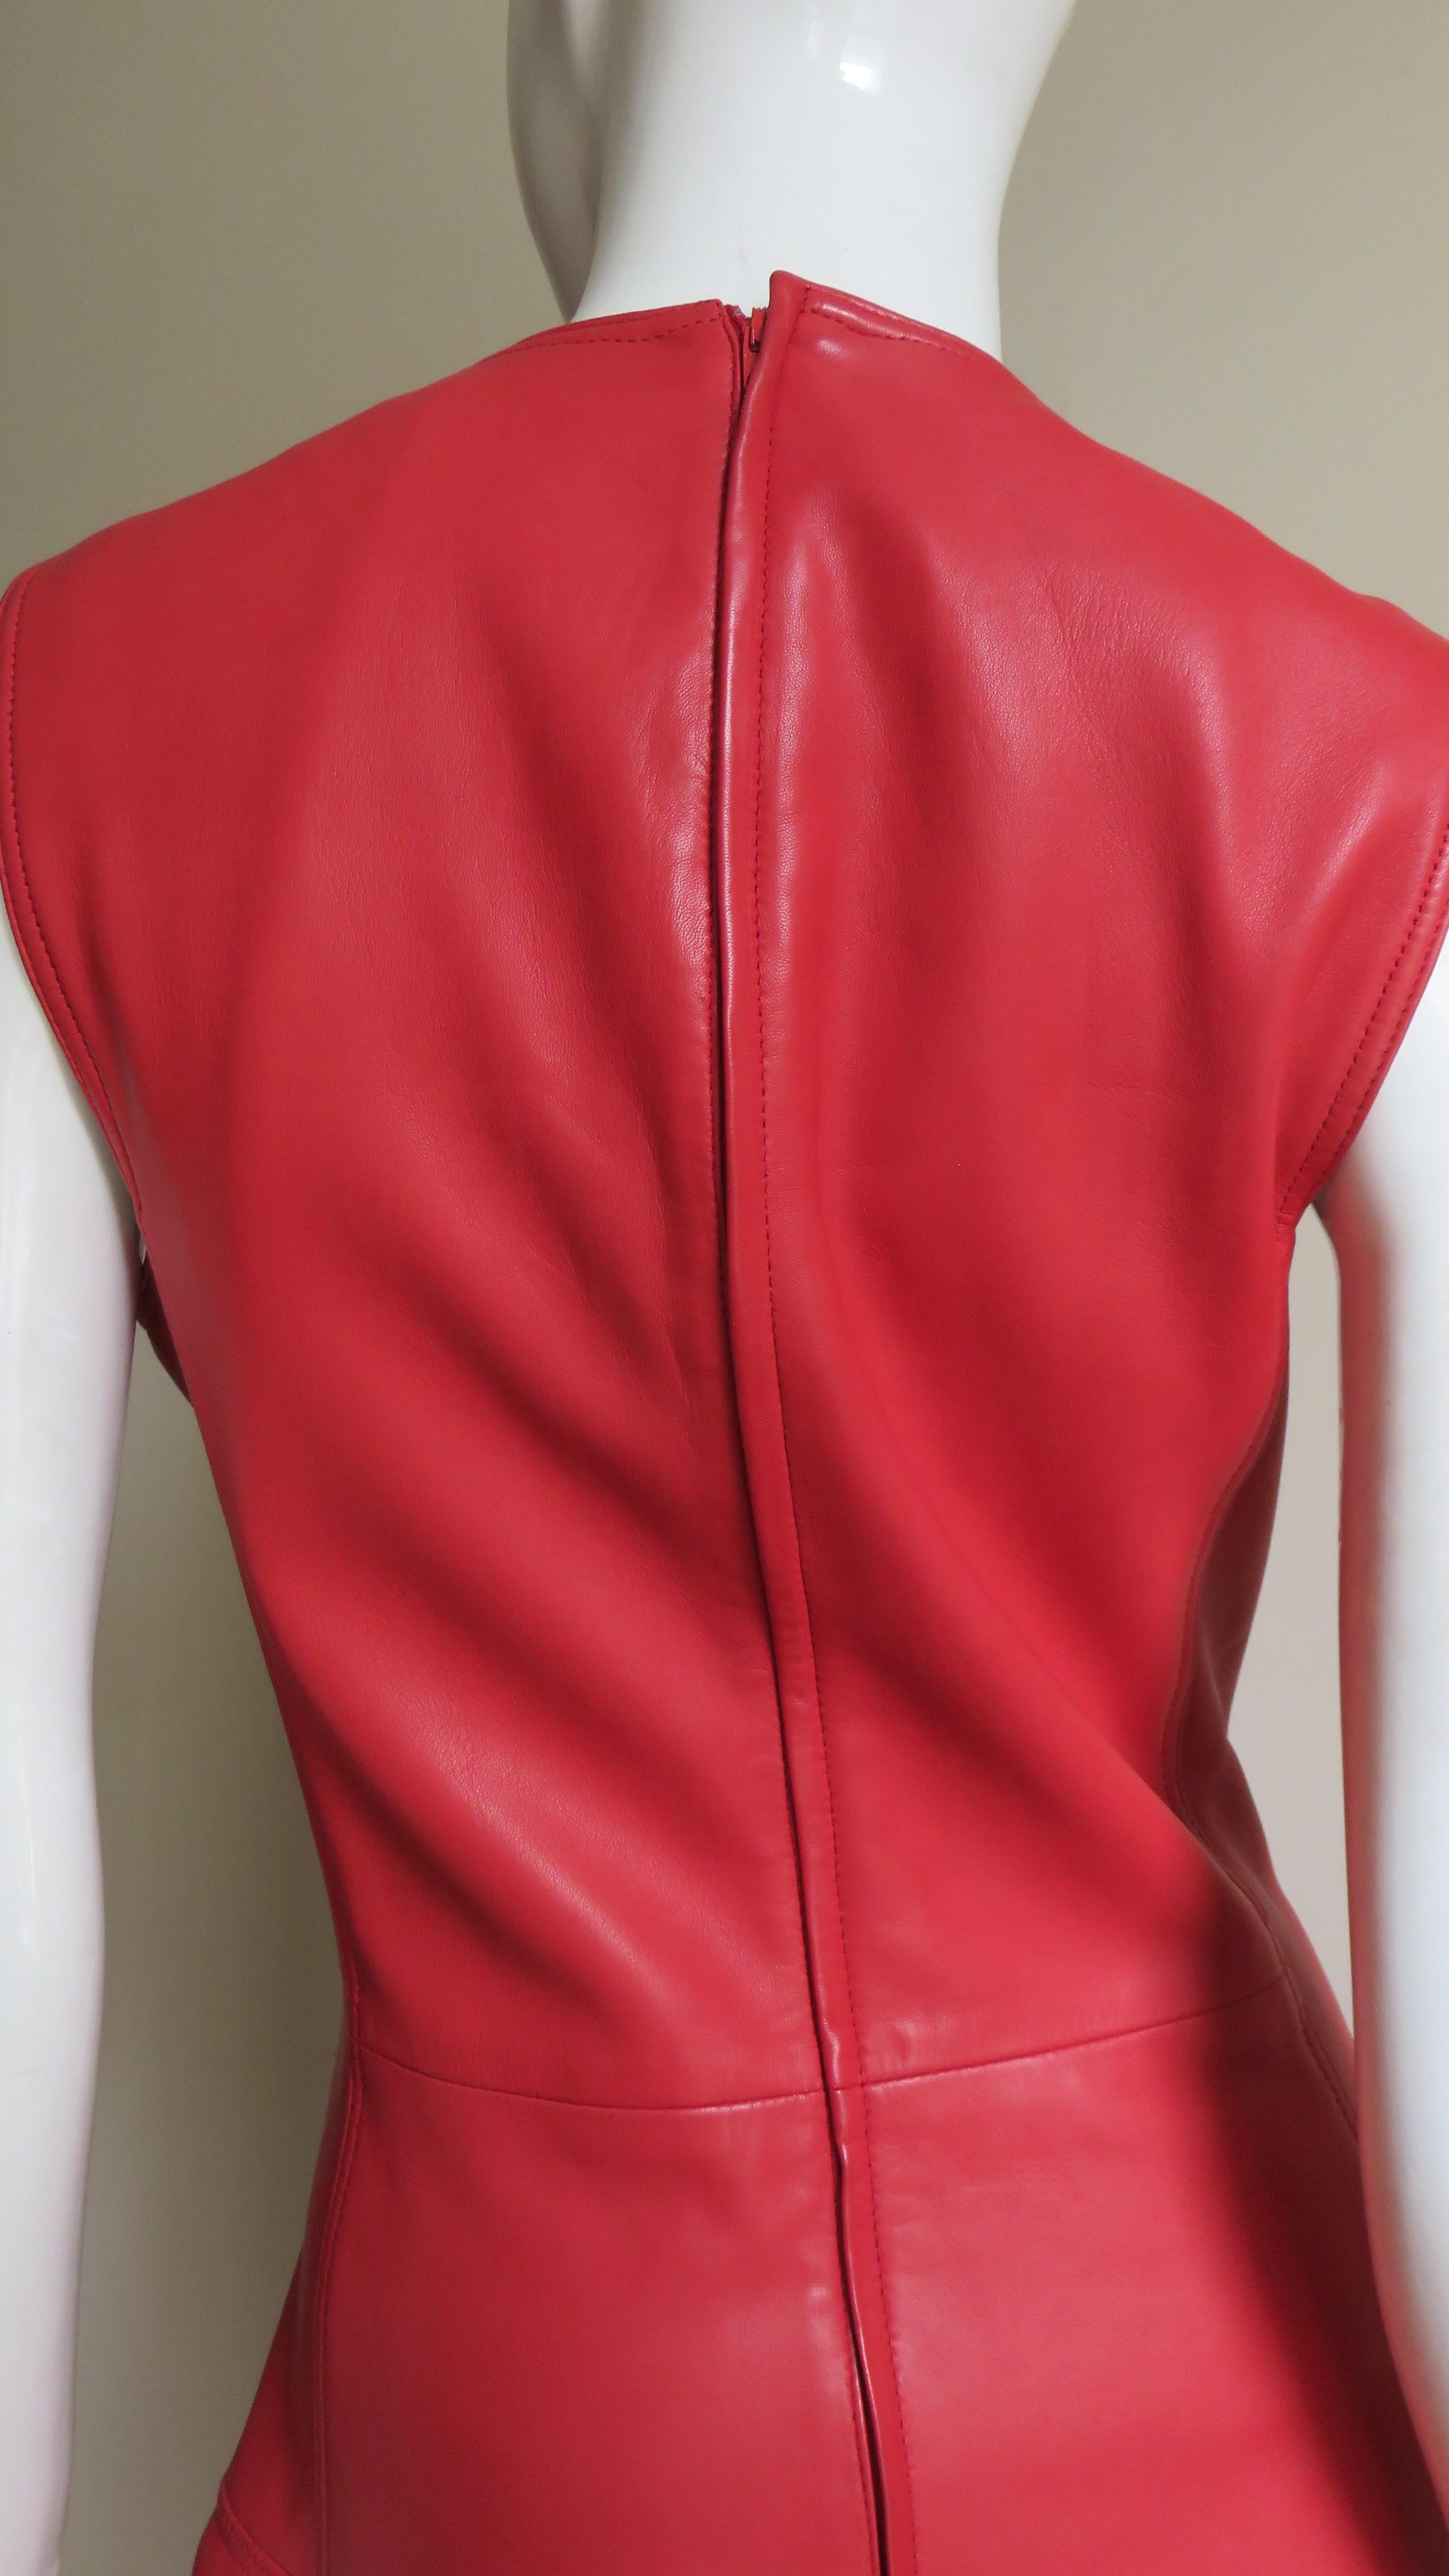 Gianni Versace New F/W 1996 Red Leather Dress For Sale 4